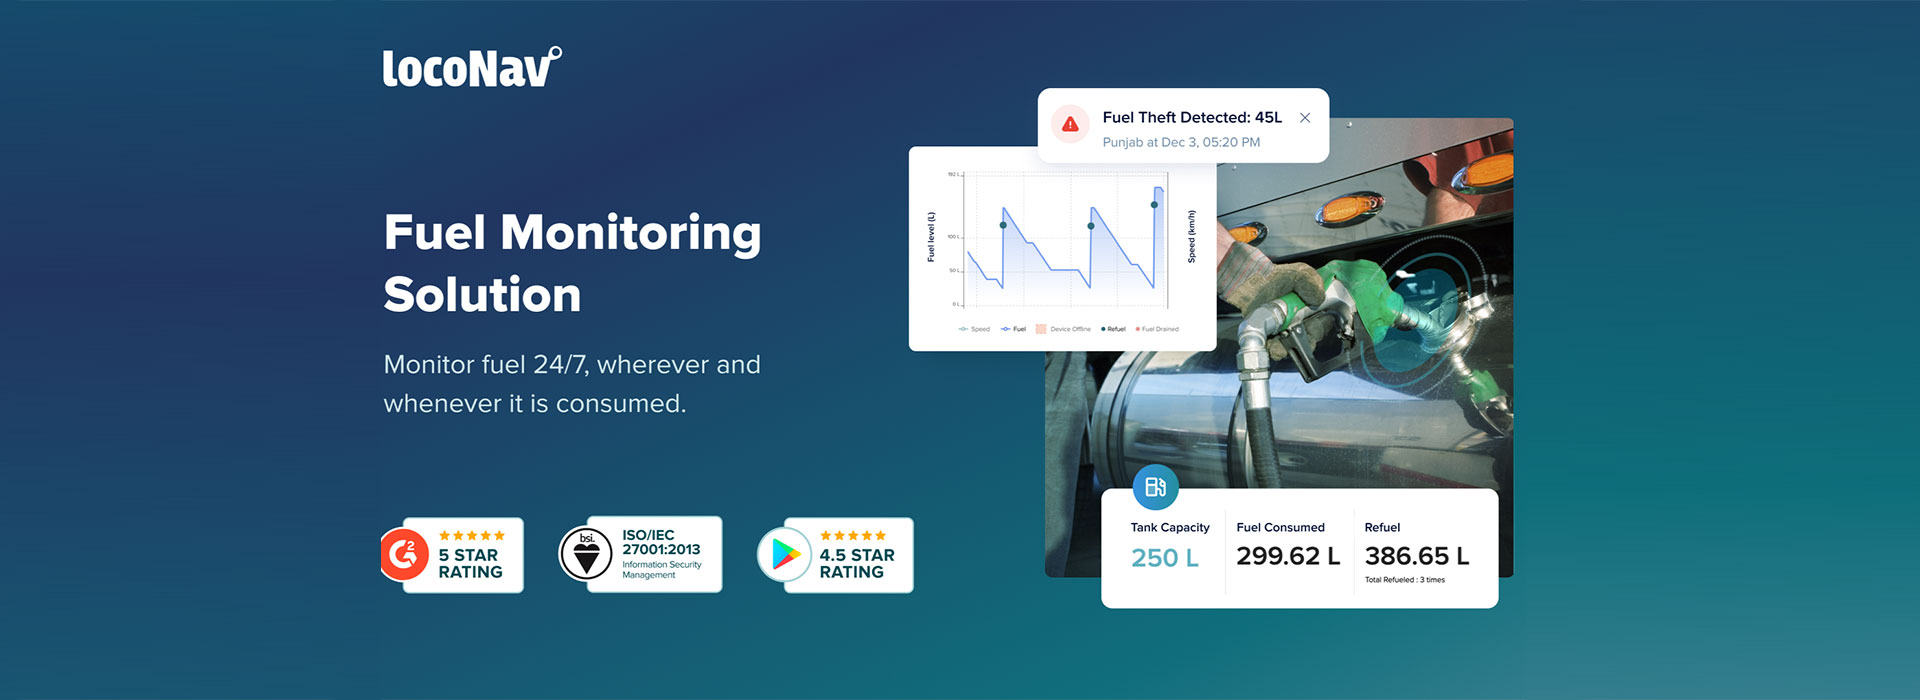 Fuel monitoring Banner  